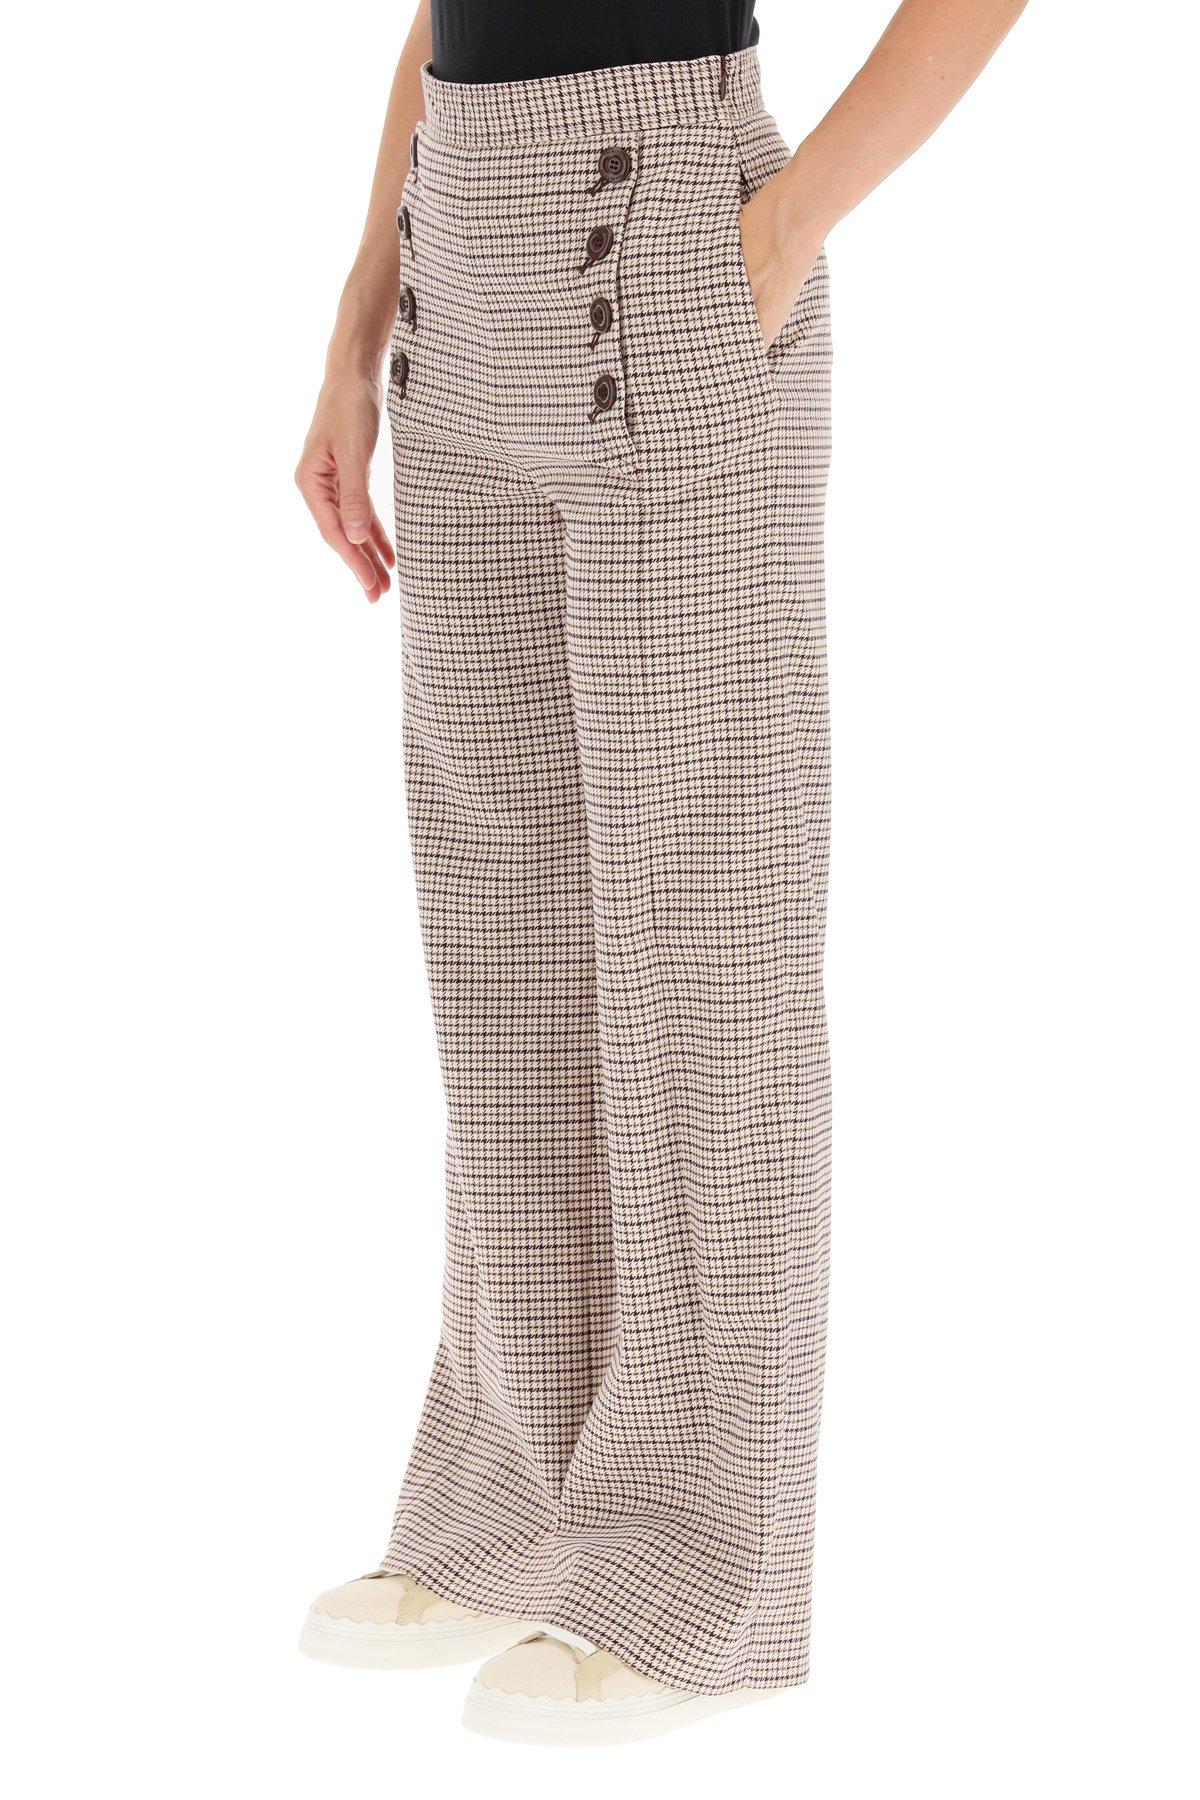 Sailor houndstooth check trousers in Multicolor, Houndstooth Pattern